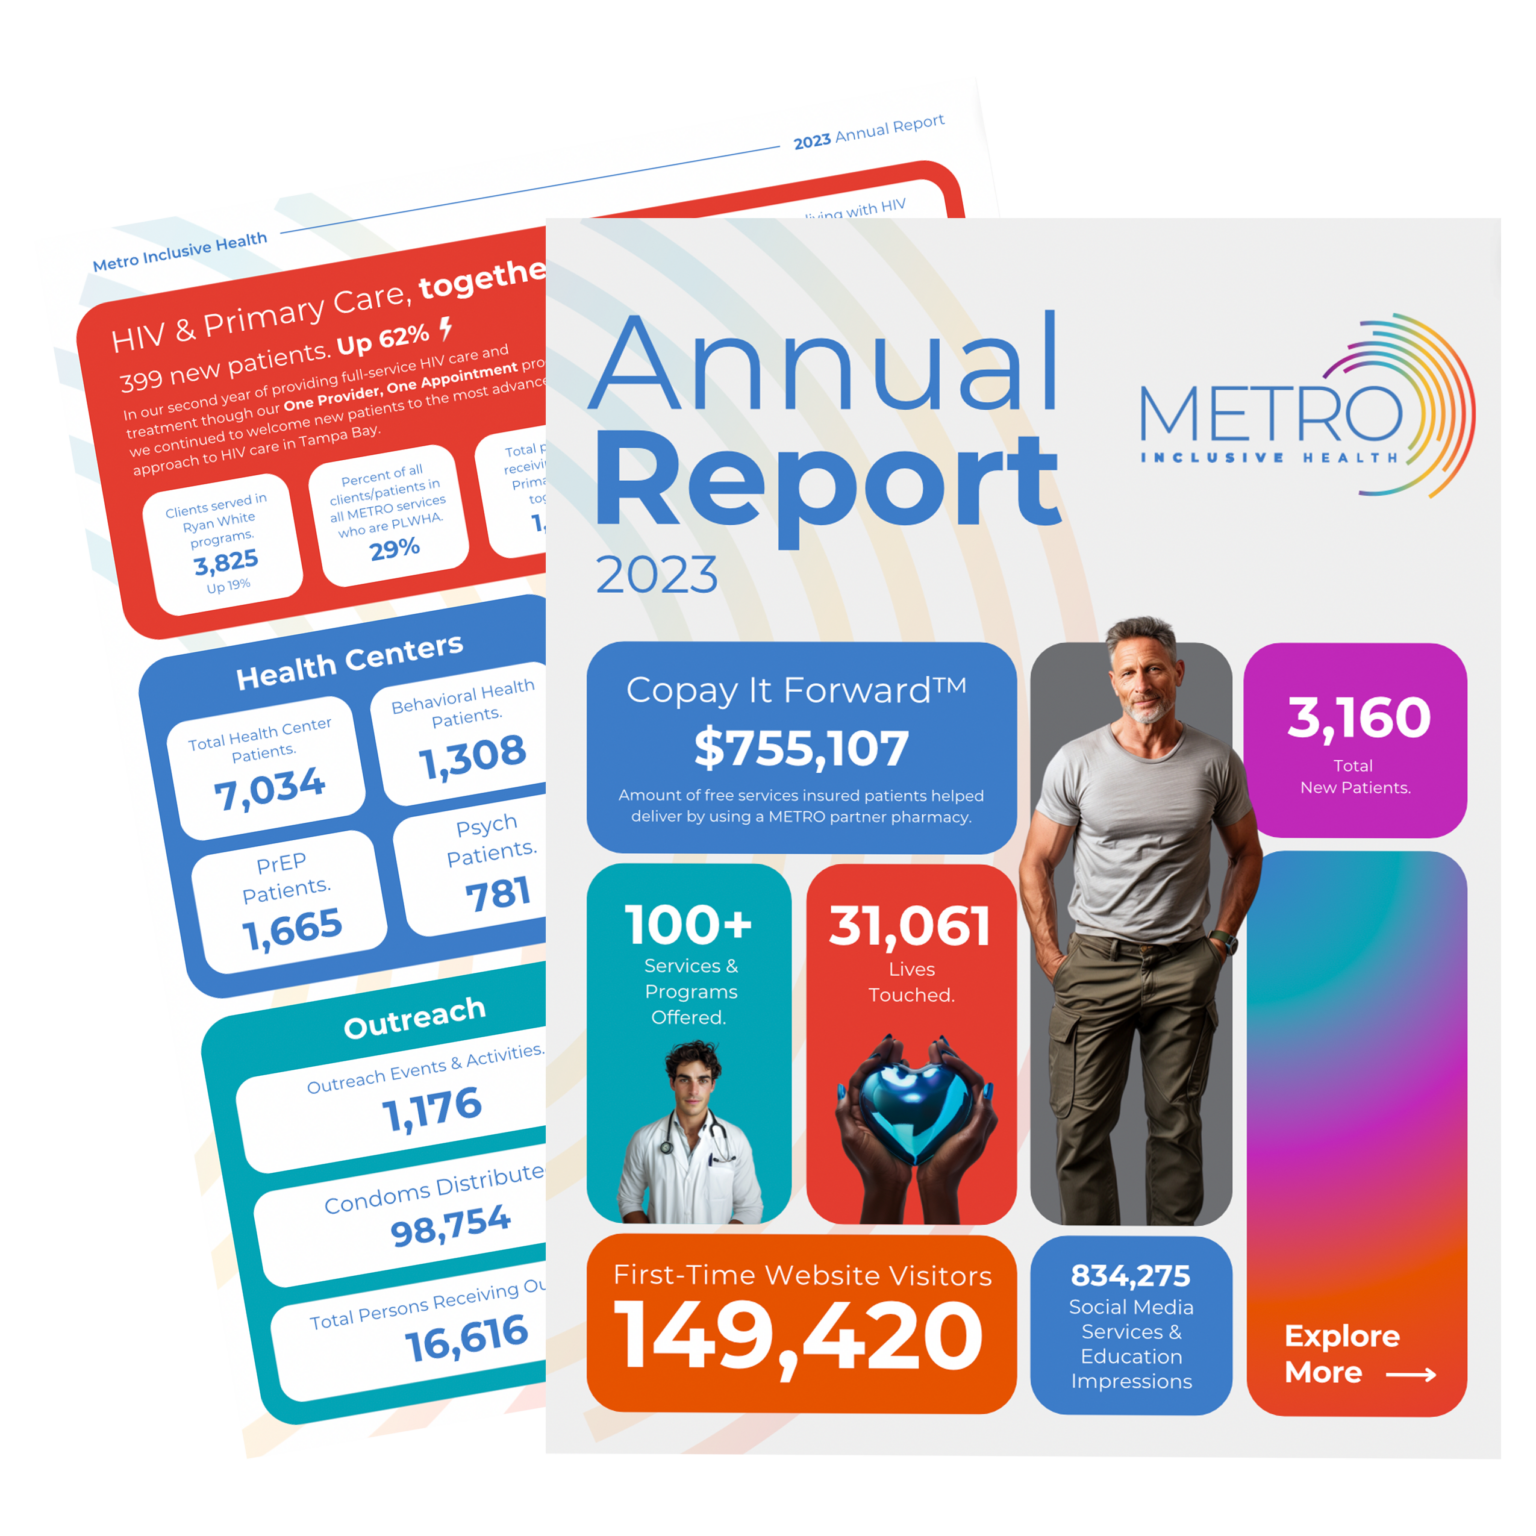 Metro Inclusive Health 2023 Annual Report cover featuring various statistics and highlights. The report showcases a man in a gray t-shirt and green pants, along with key figures such as 3,160 total new patients, $755,107 in free services through the Copay It Forward program, 31,061 lives touched, and 149,420 first-time website visitors. Additional data includes health center and outreach statistics, emphasizing the impact and reach of Metro Inclusive Health's services and programs.